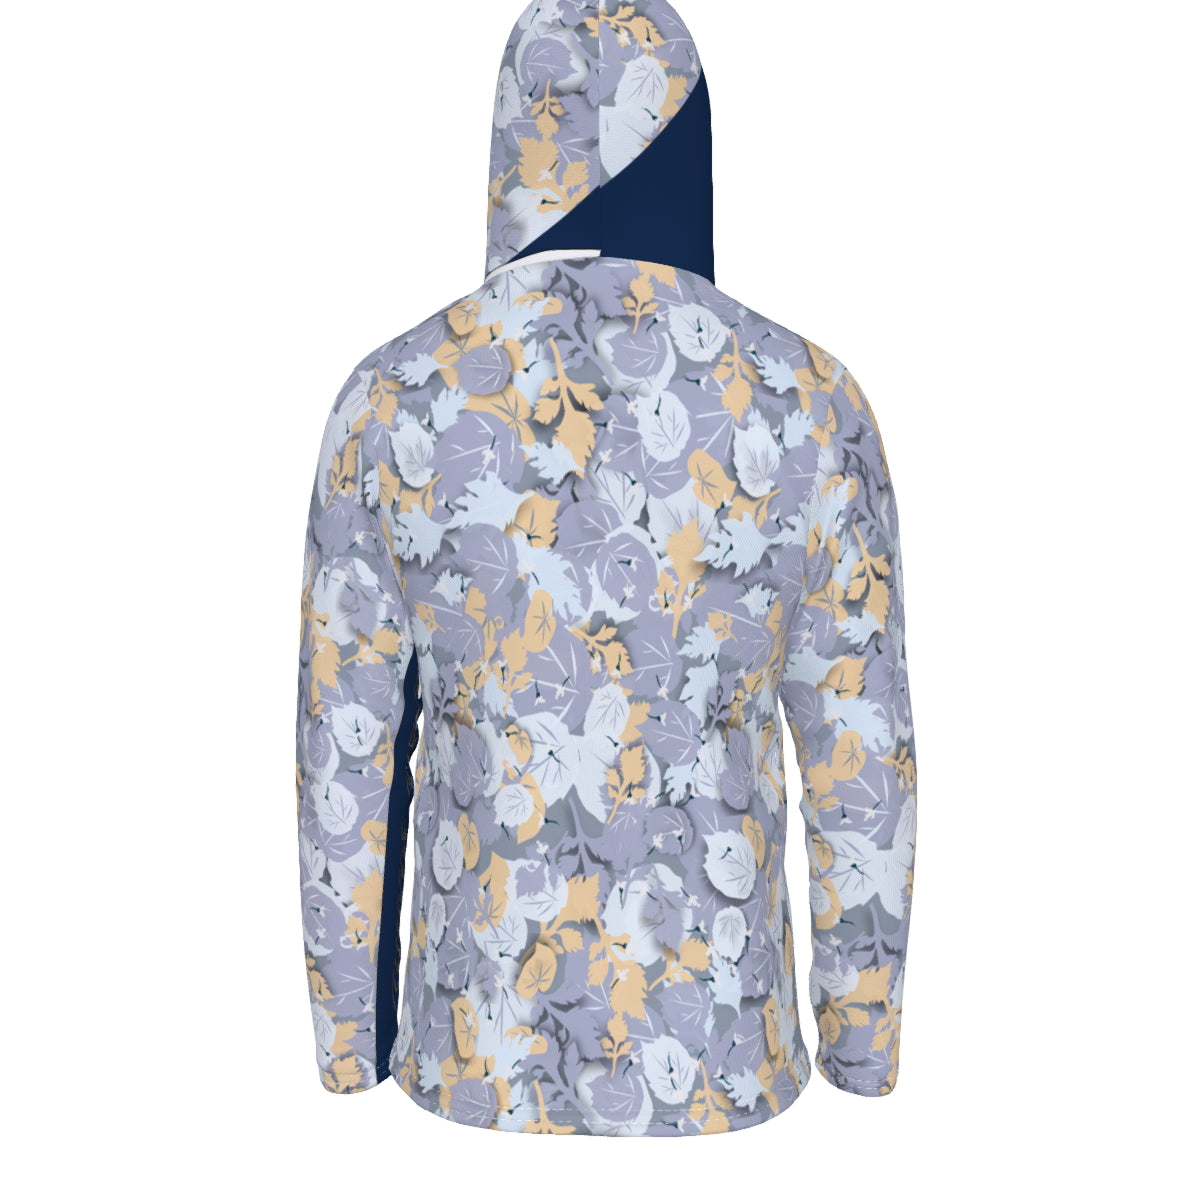 WASABI leave CAMO Unisex Pullover Hoodie With face shield　山葵の葉カモフラフーディ